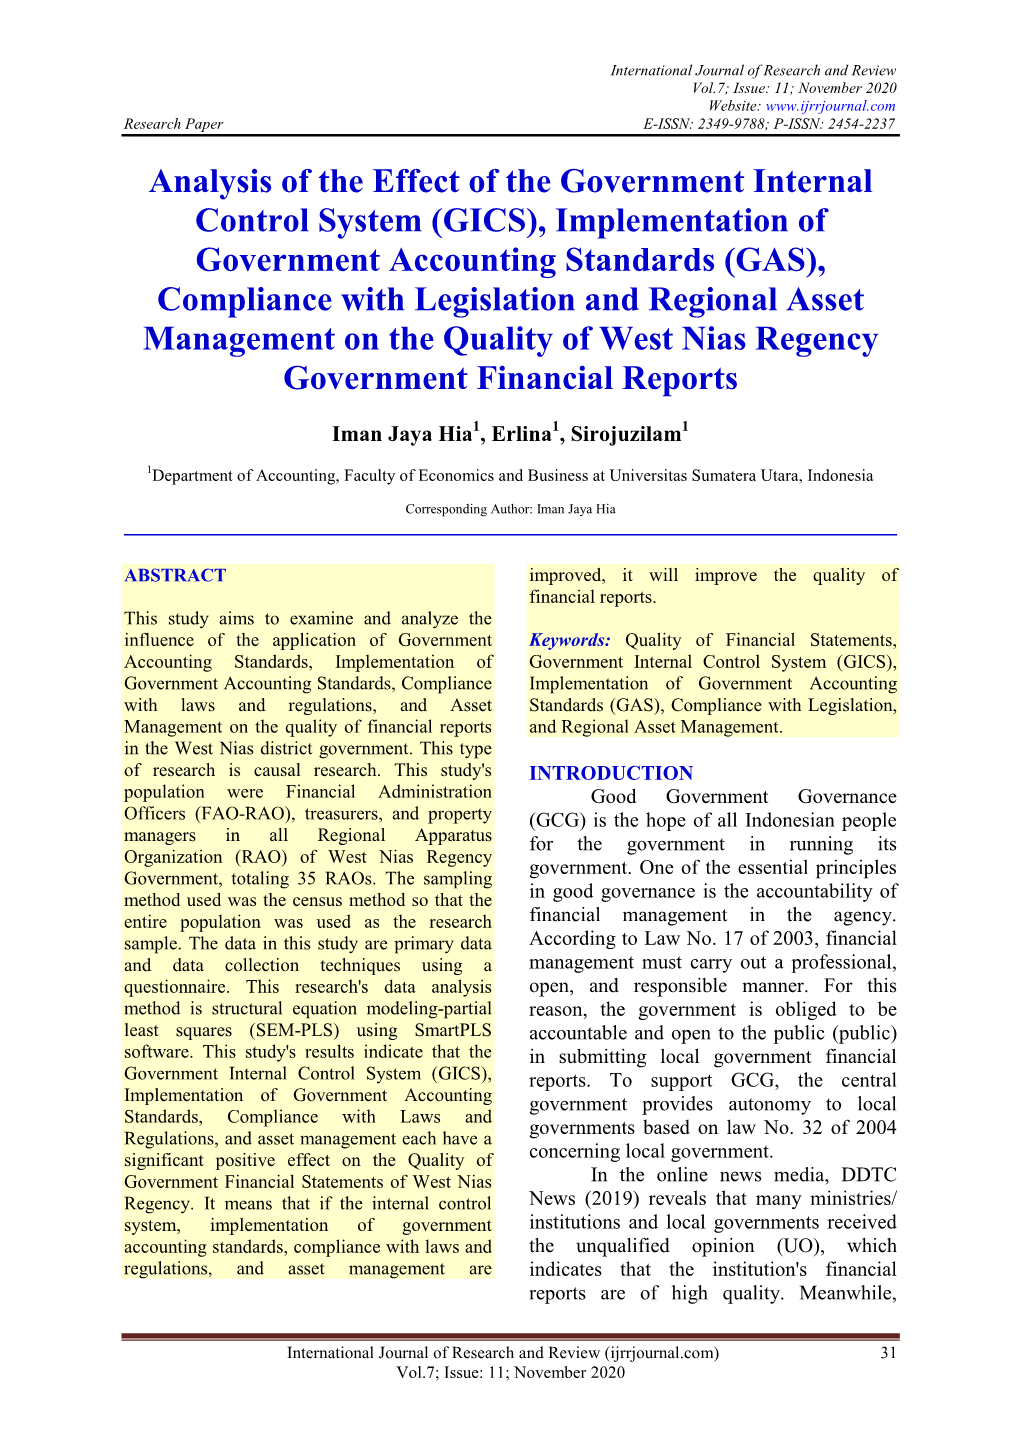 Analysis of the Effect of the Government Internal Control System